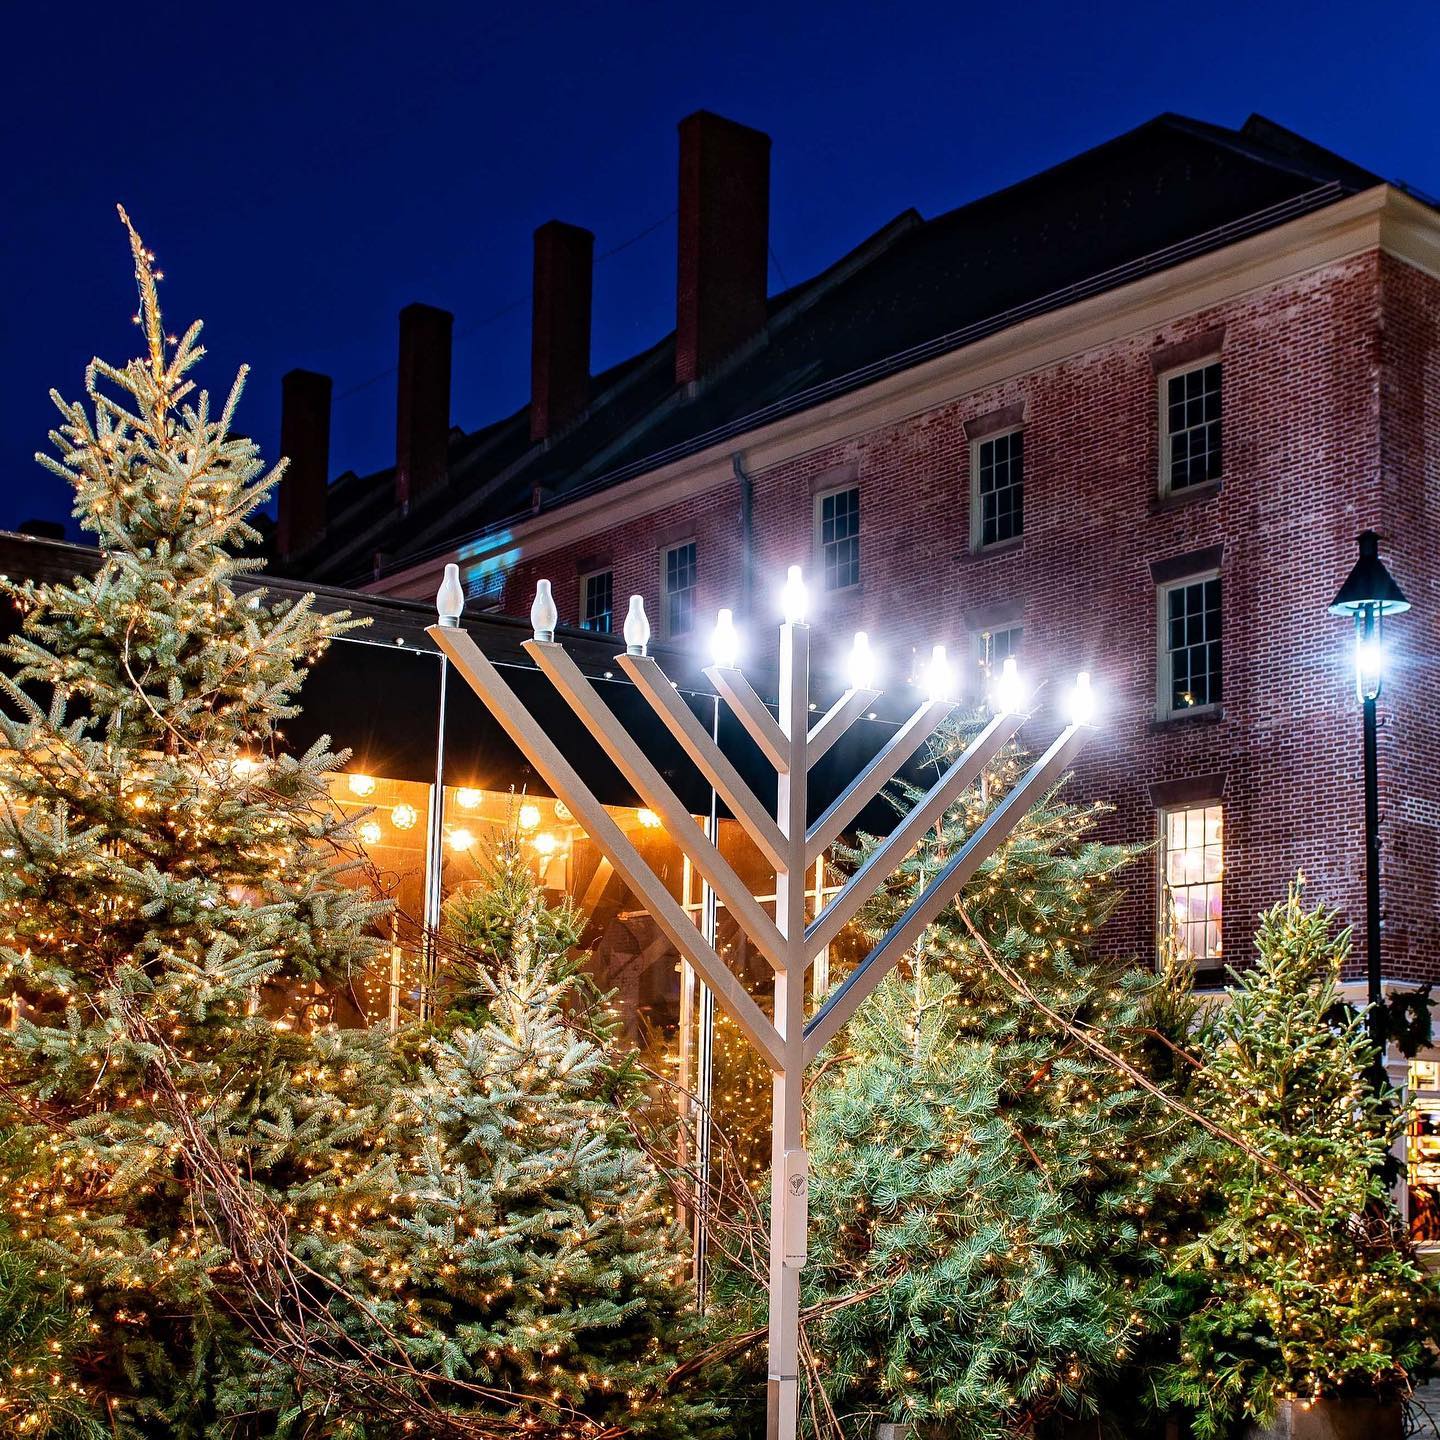 Crafts. Latkes. Live music. Celebrate the first day of Chanukah with community and the grand menorah lighting. Sun. 11/28, 3-5pm Details ➤ Link in bio. #TheSeaport